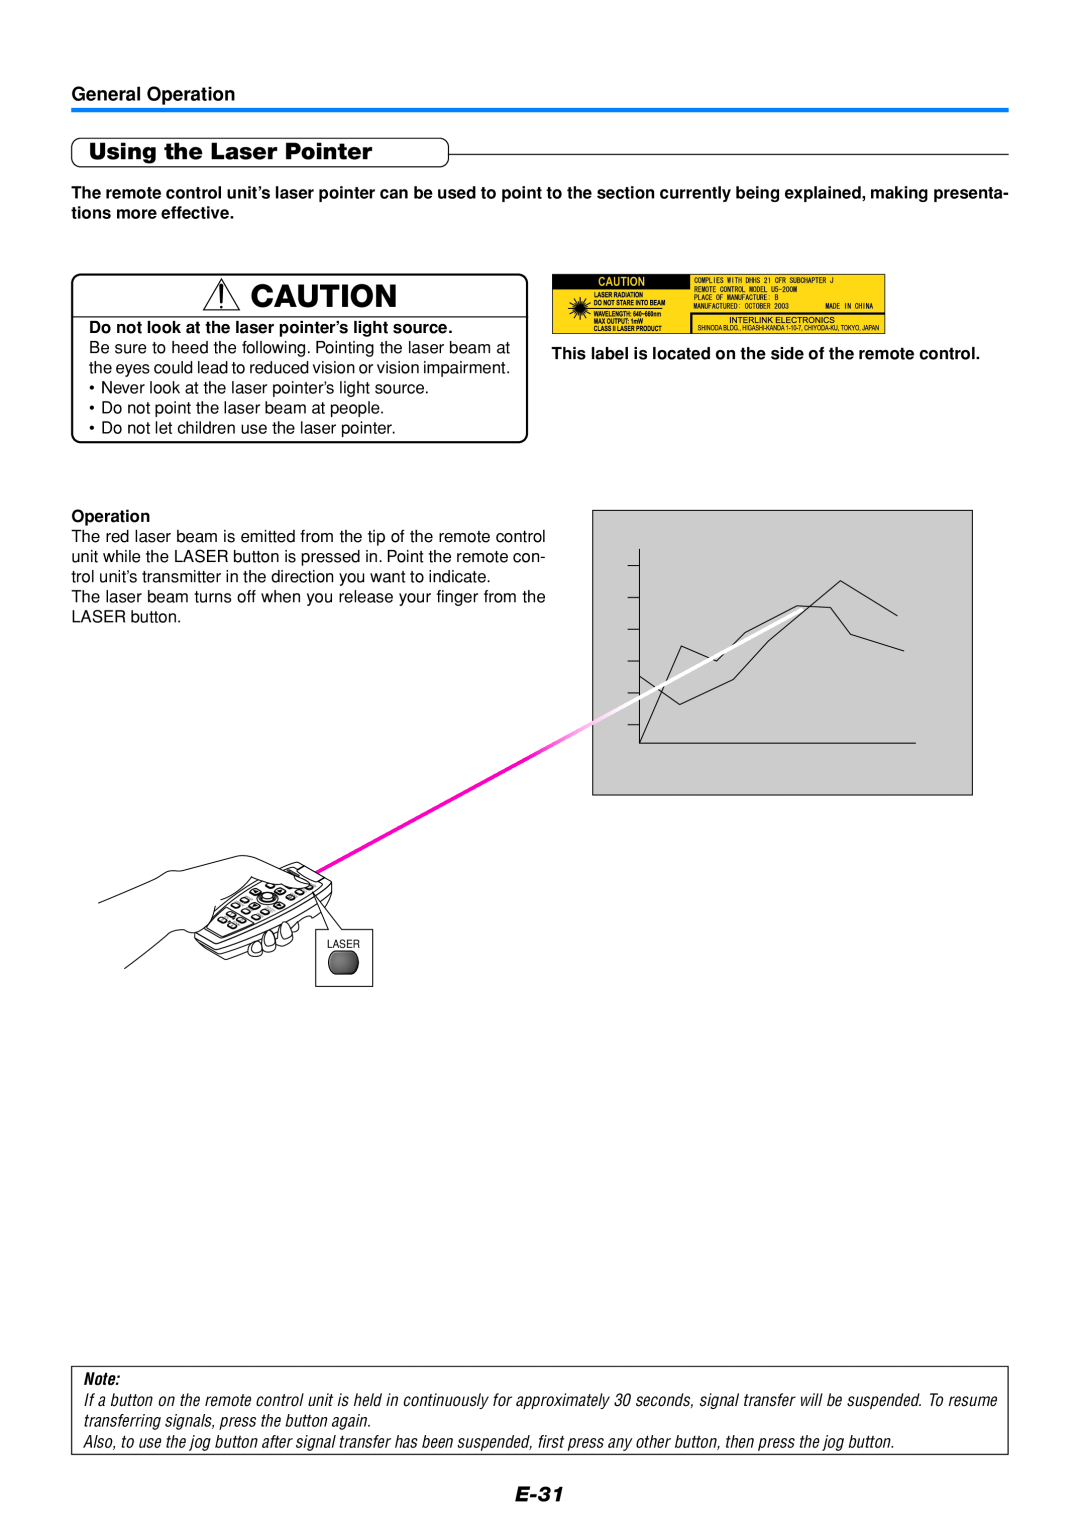 Mitsubishi Electronics DATA PROJECTOR user manual Using the Laser Pointer, E-31, General Operation 